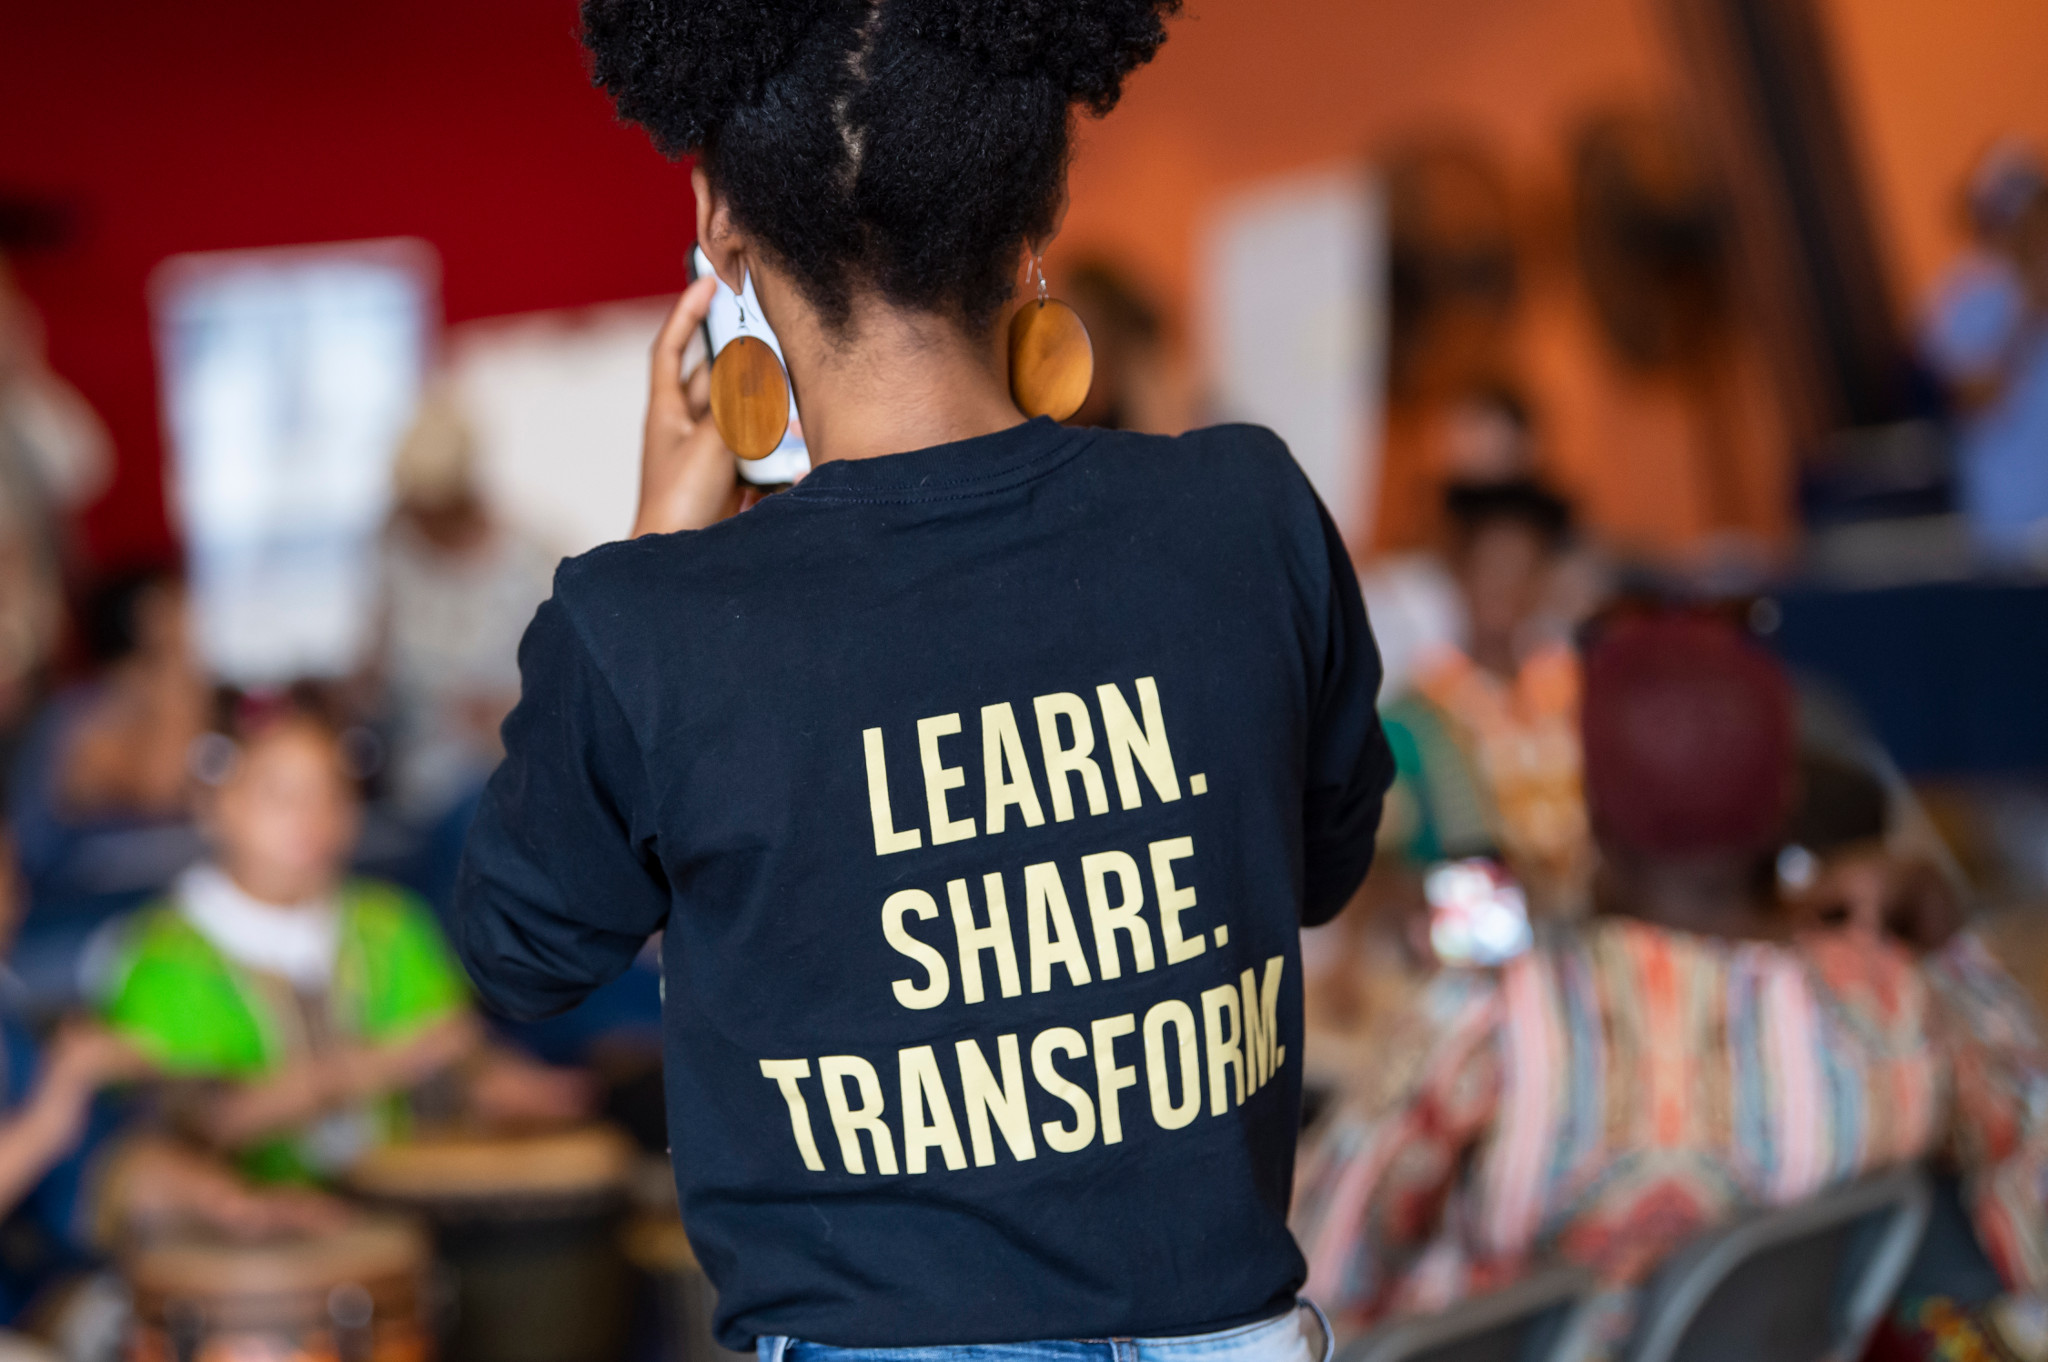 the back of a standing individual wearing a shirt with the words "LEARN. SHARE. TRANSFORM."